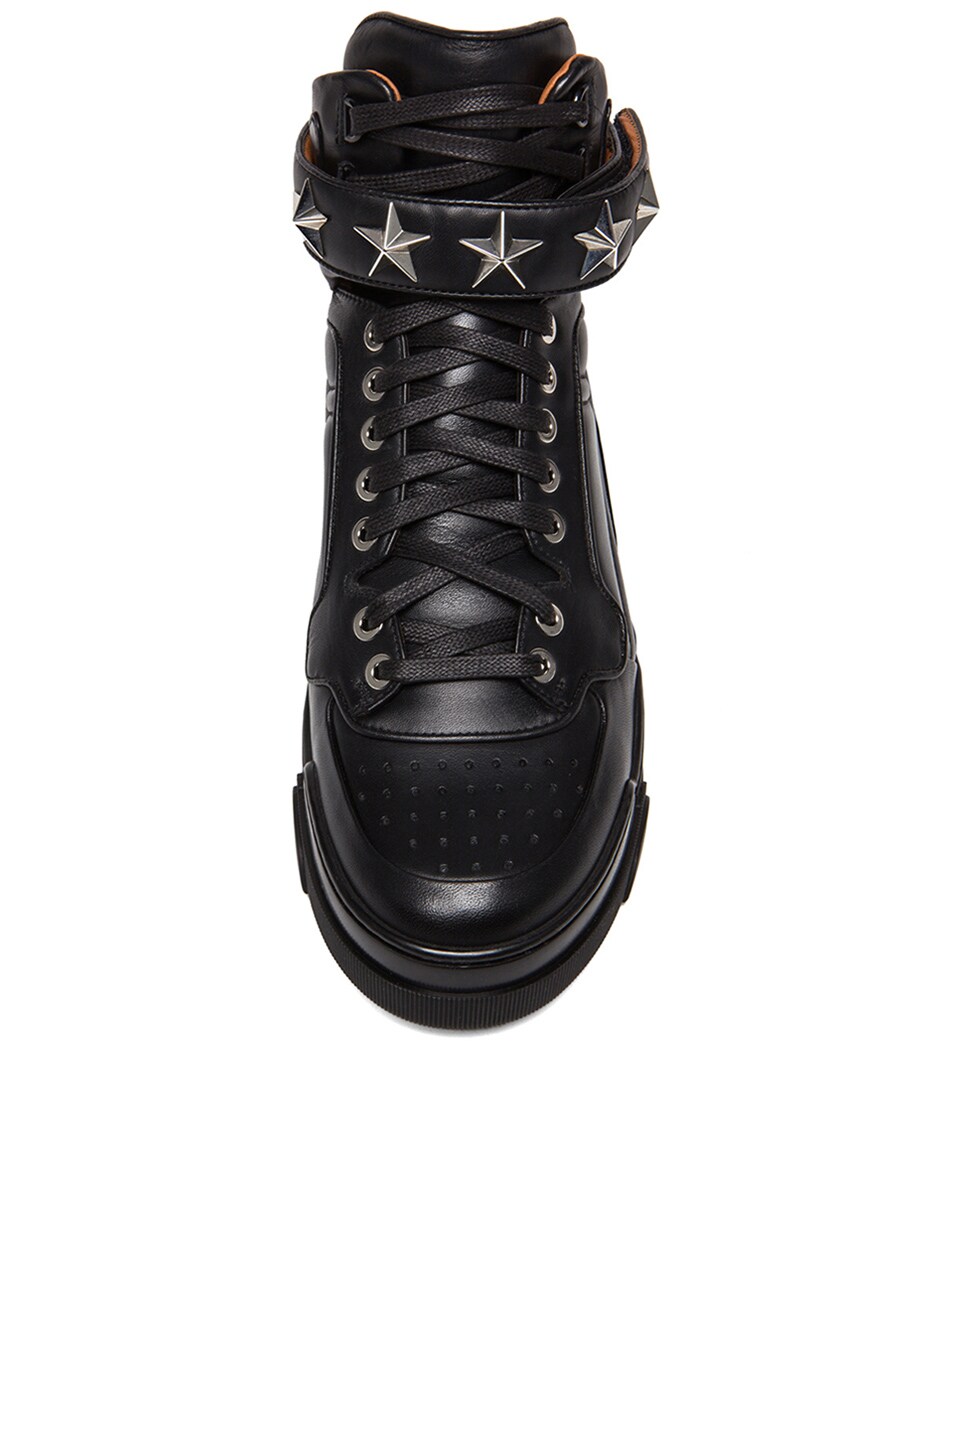 GIVENCHY Tyson High Top Leather Sneakers